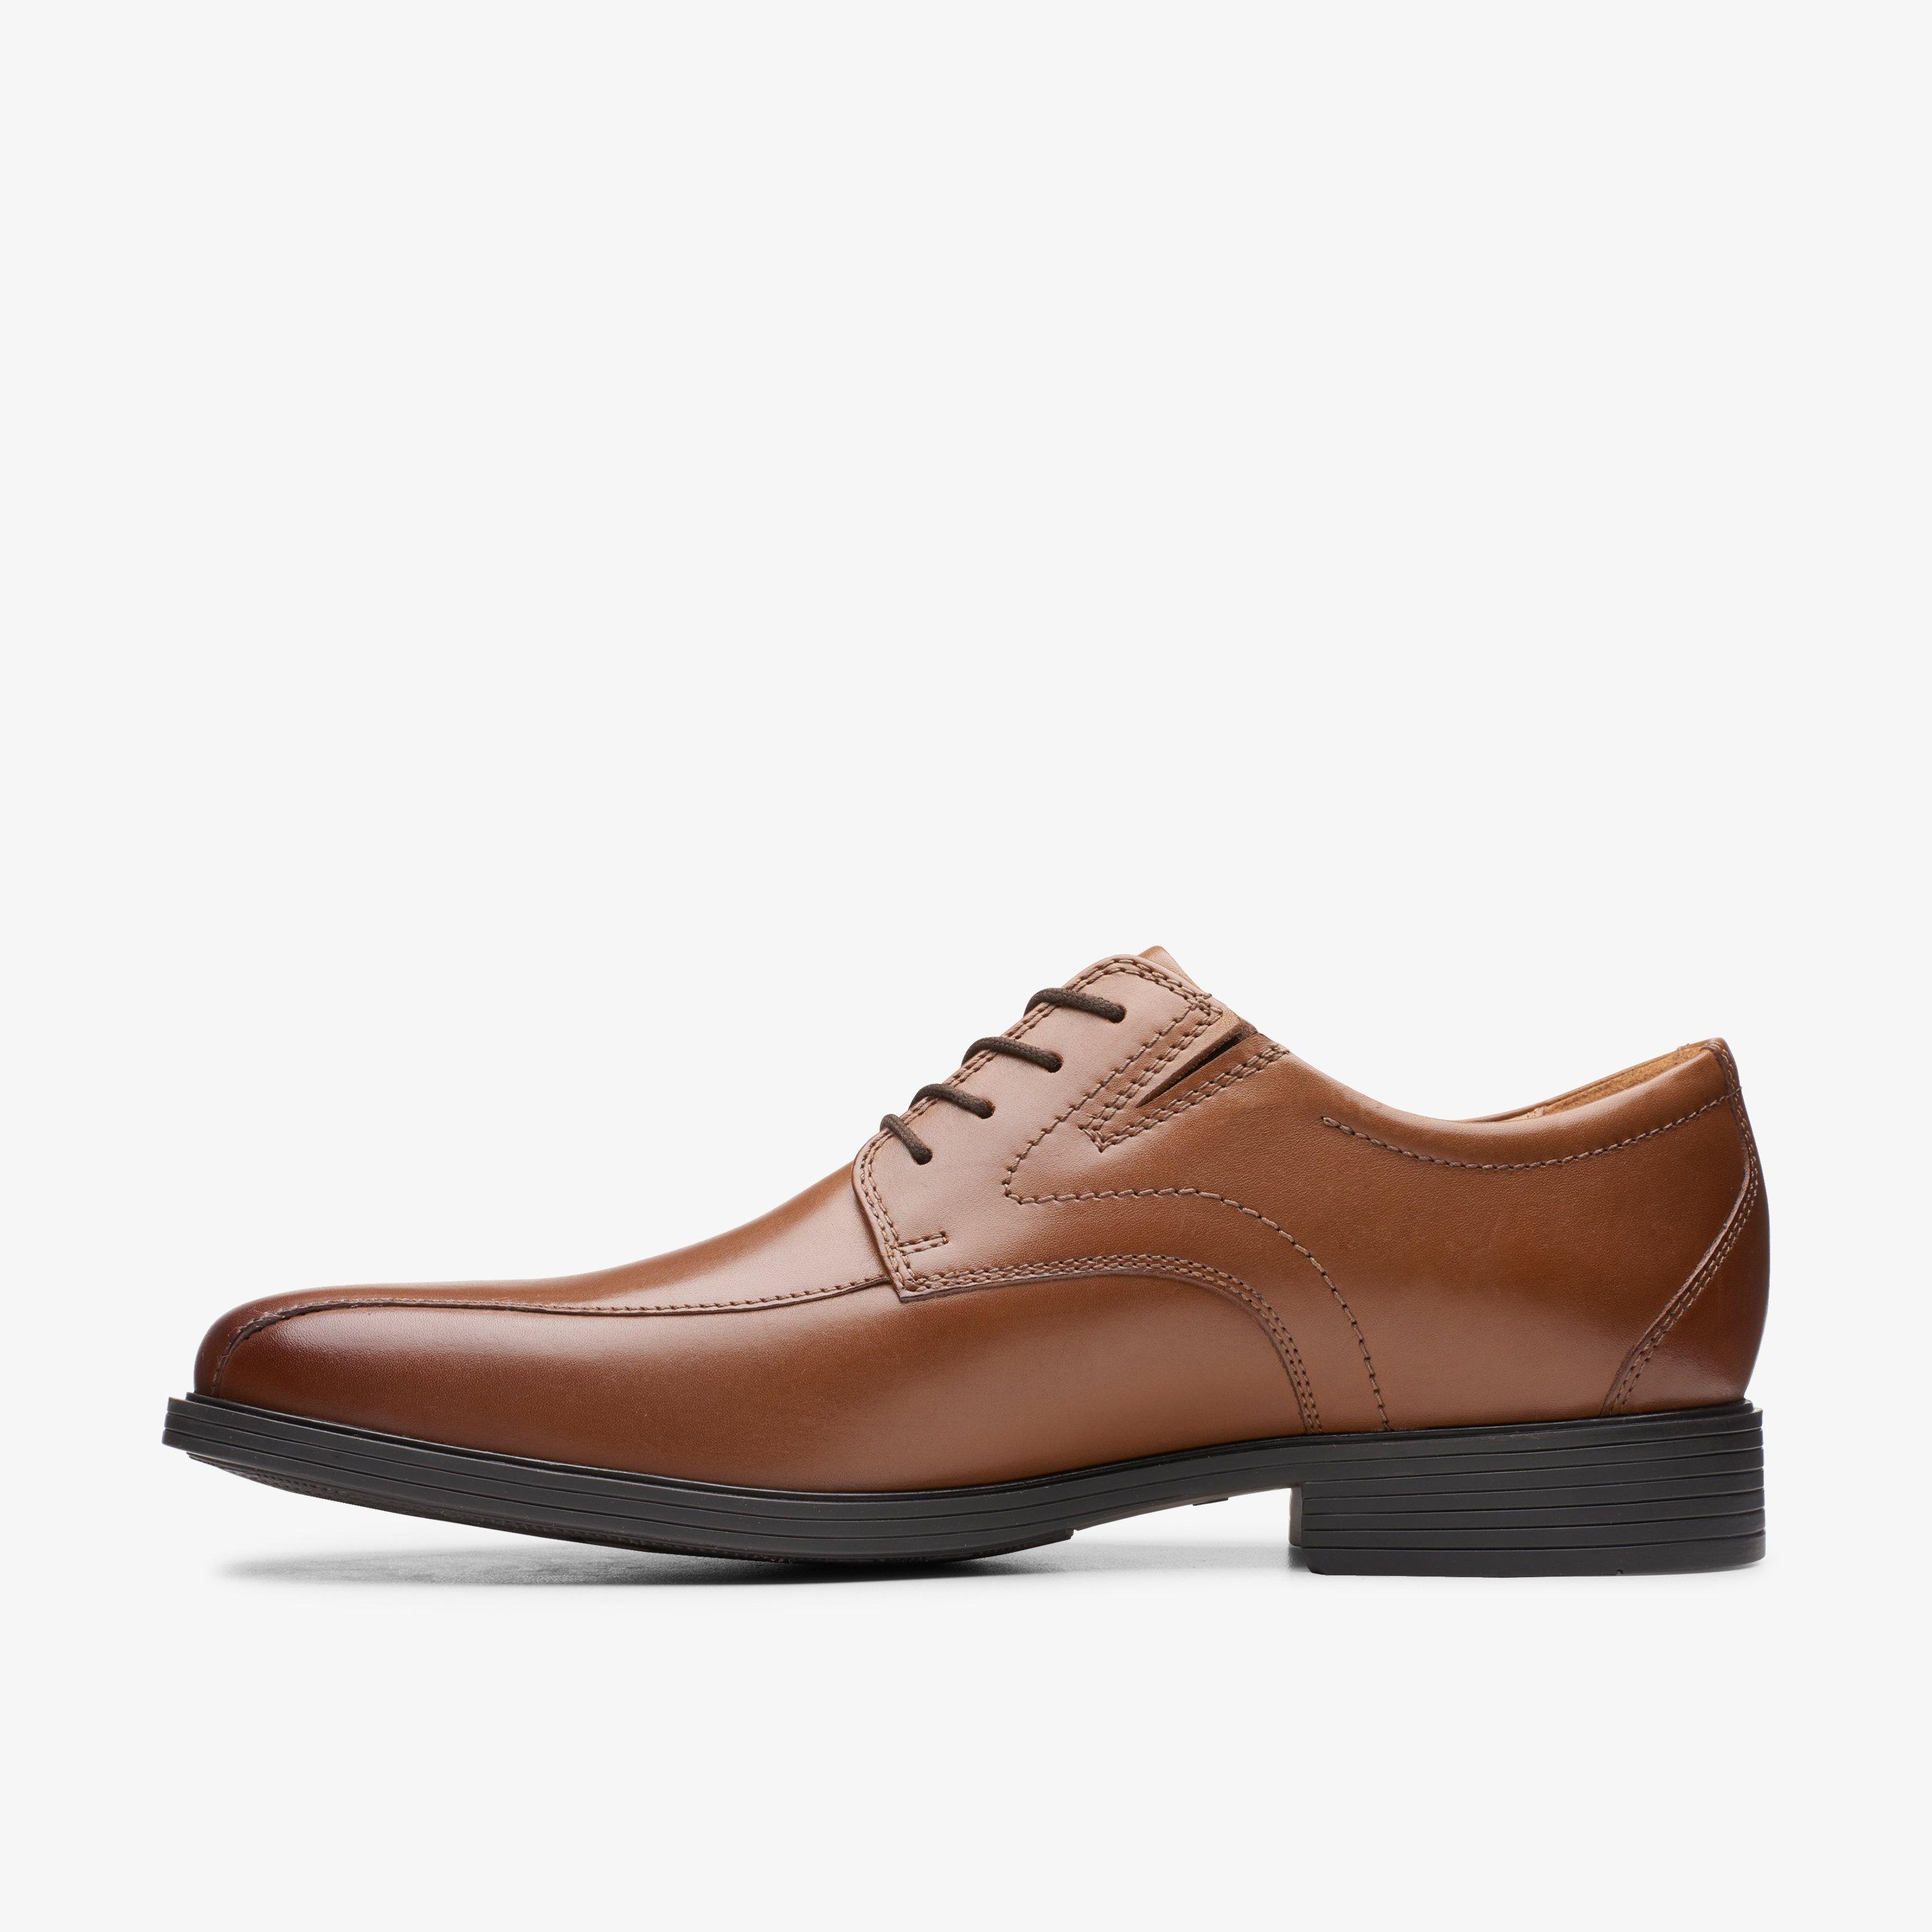 Dress Shoes - Black & Brown Leather Shoes Clarks